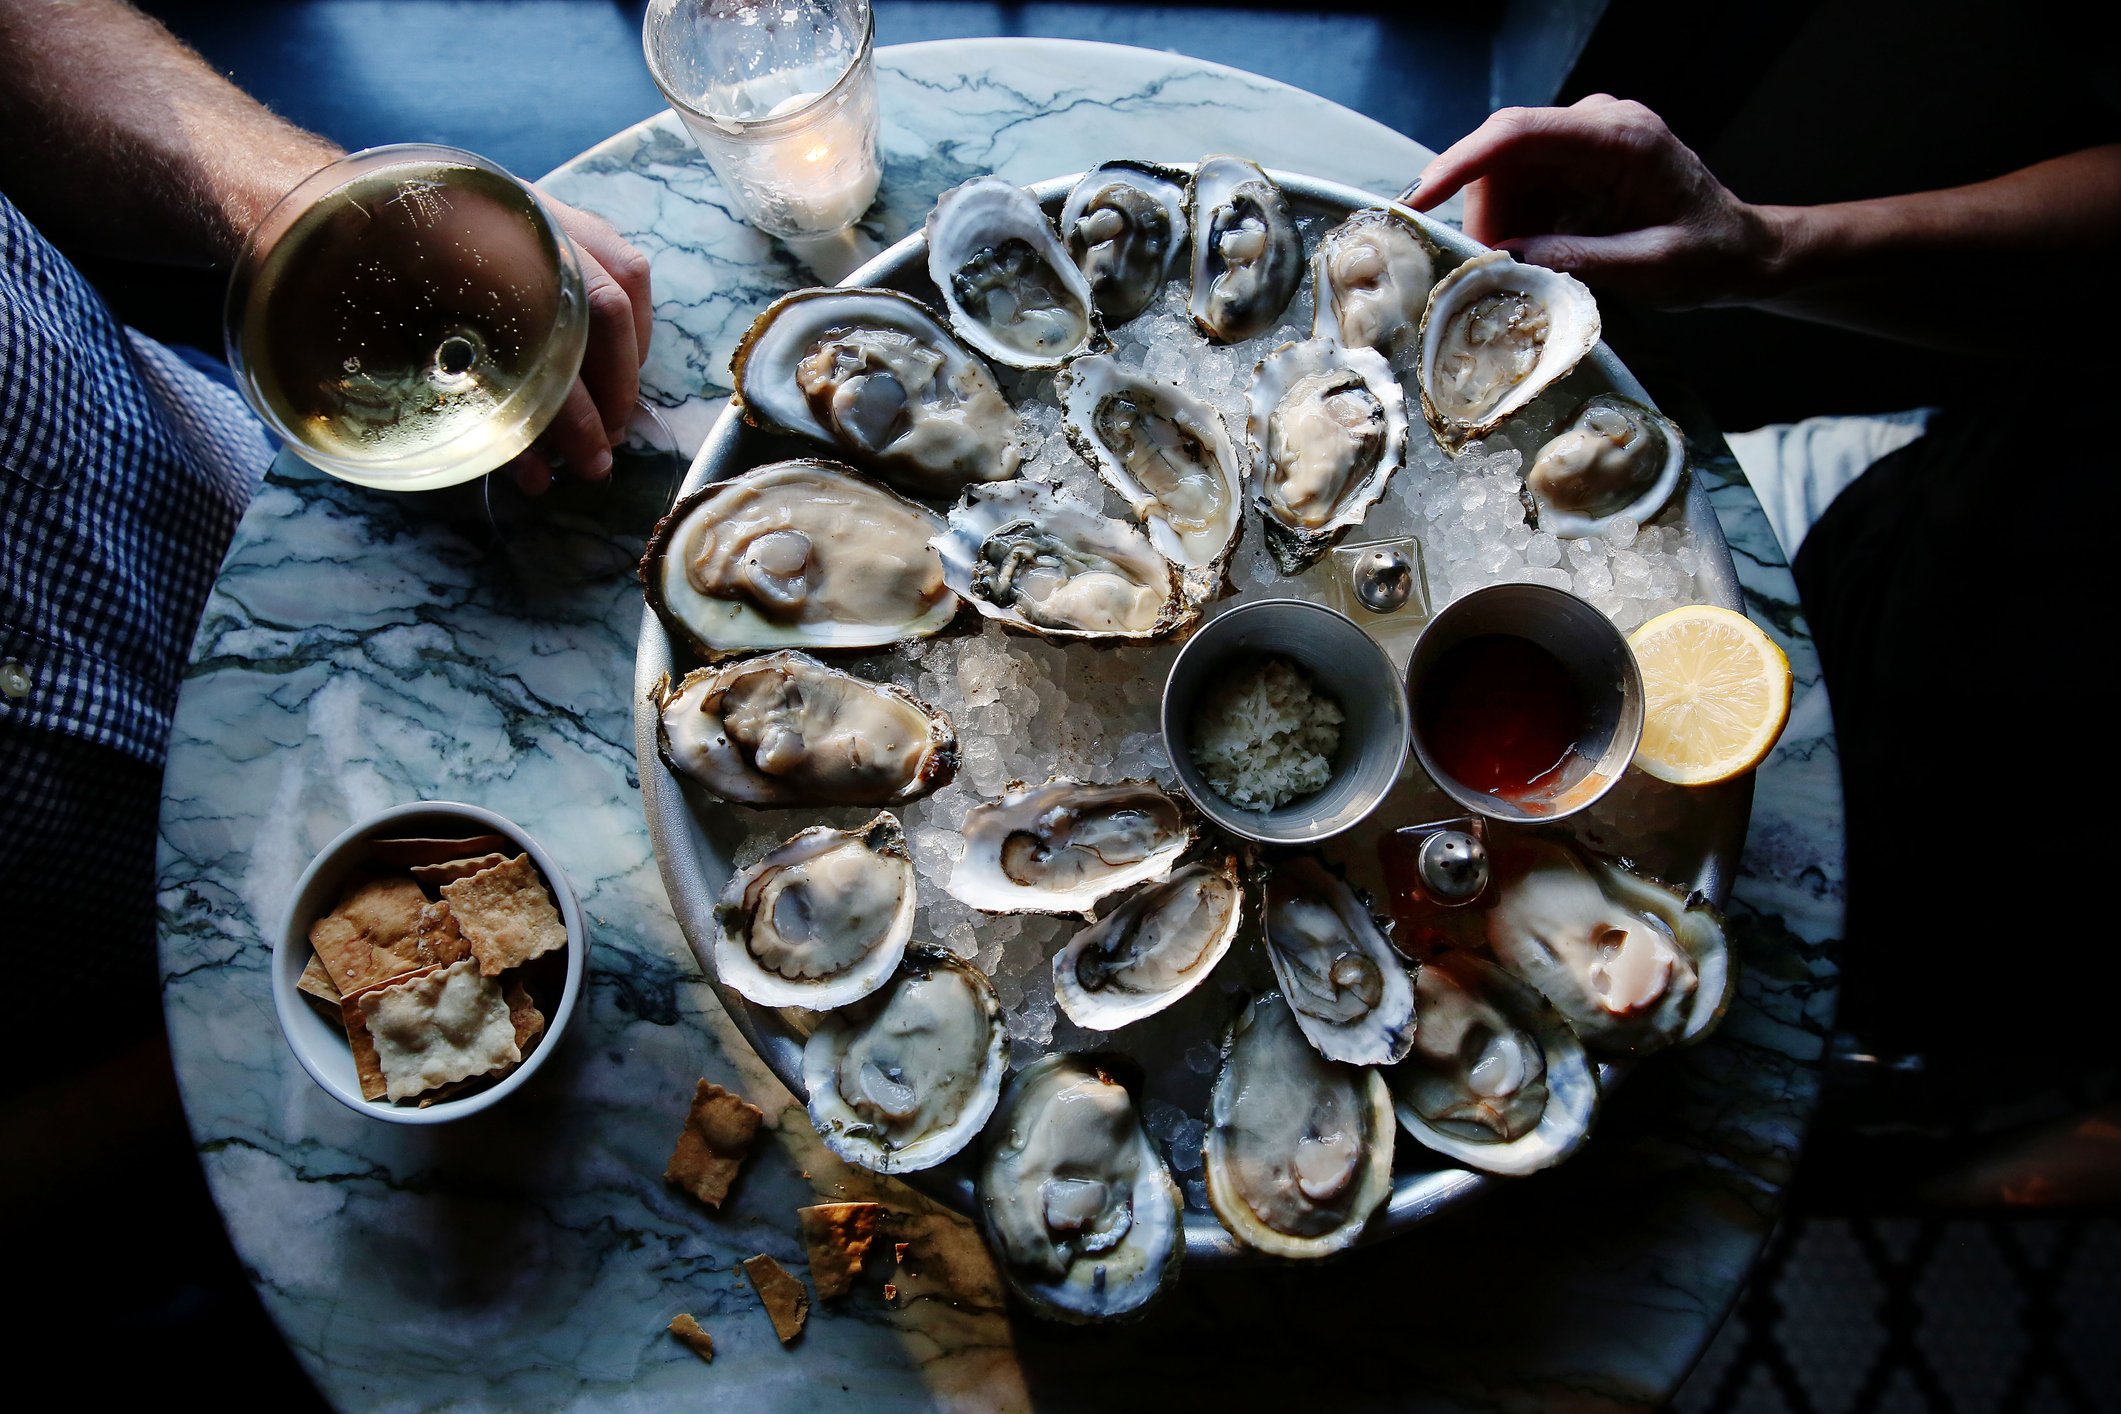 A platter of oysters on a table